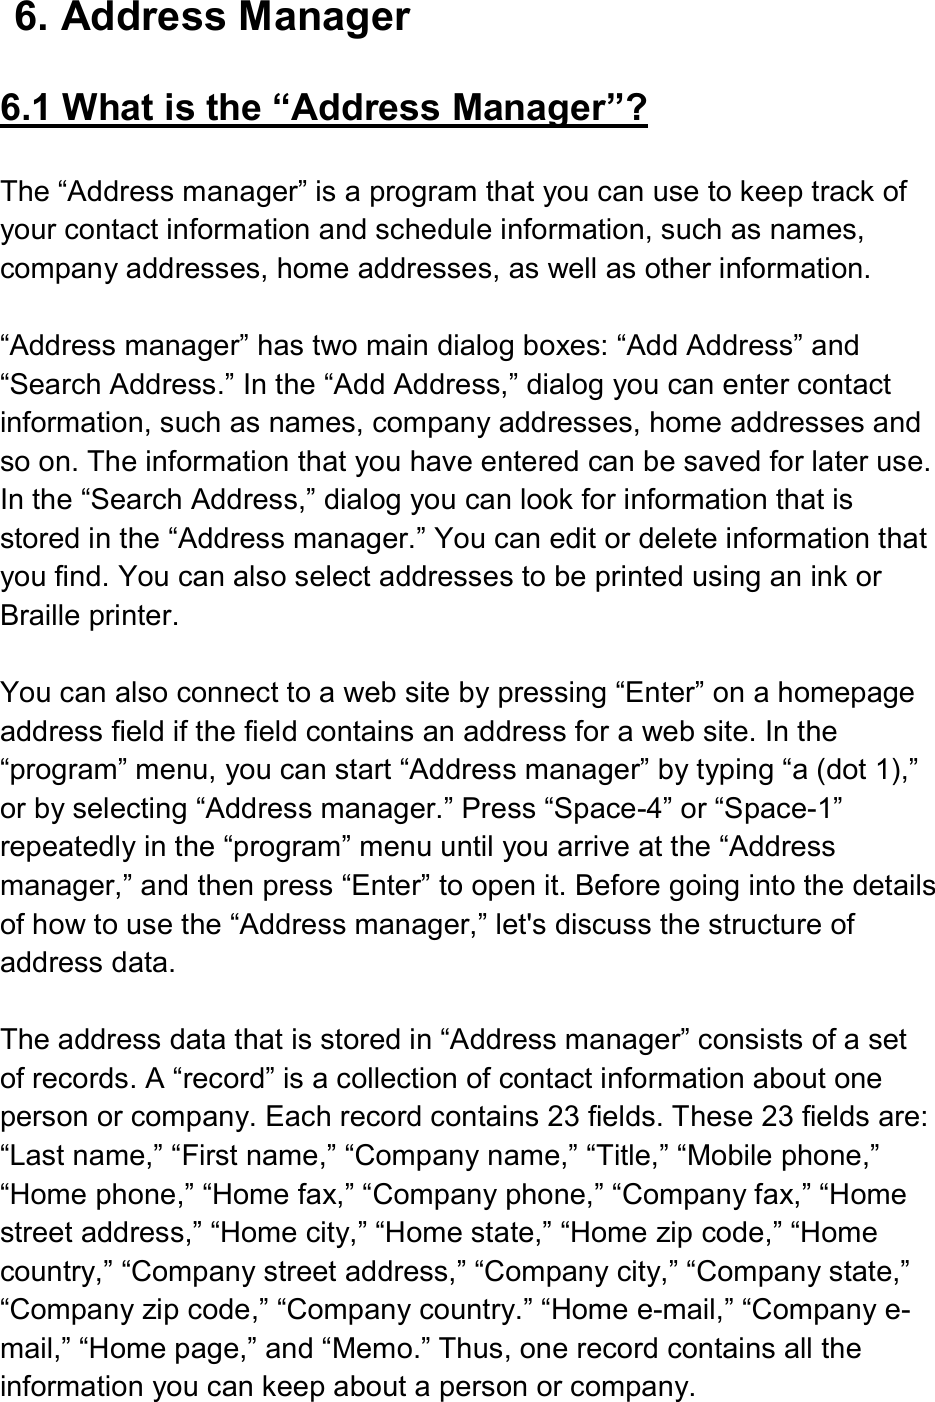  6. Address Manager  6.1 What is the “Address Manager”?  The “Address manager” is a program that you can use to keep track of your contact information and schedule information, such as names, company addresses, home addresses, as well as other information.  “Address manager” has two main dialog boxes: “Add Address” and “Search Address.” In the “Add Address,” dialog you can enter contact information, such as names, company addresses, home addresses and so on. The information that you have entered can be saved for later use. In the “Search Address,” dialog you can look for information that is stored in the “Address manager.” You can edit or delete information that you find. You can also select addresses to be printed using an ink or Braille printer.  You can also connect to a web site by pressing “Enter” on a homepage address field if the field contains an address for a web site. In the “program” menu, you can start “Address manager” by typing “a (dot 1),” or by selecting “Address manager.” Press “Space-4” or “Space-1” repeatedly in the “program” menu until you arrive at the “Address manager,” and then press “Enter” to open it. Before going into the details of how to use the “Address manager,” let&apos;s discuss the structure of address data.  The address data that is stored in “Address manager” consists of a set of records. A “record” is a collection of contact information about one person or company. Each record contains 23 fields. These 23 fields are: “Last name,” “First name,” “Company name,” “Title,” “Mobile phone,” “Home phone,” “Home fax,” “Company phone,” “Company fax,” “Home street address,” “Home city,” “Home state,” “Home zip code,” “Home country,” “Company street address,” “Company city,” “Company state,” “Company zip code,” “Company country.” “Home e-mail,” “Company e-mail,” “Home page,” and “Memo.” Thus, one record contains all the information you can keep about a person or company. 